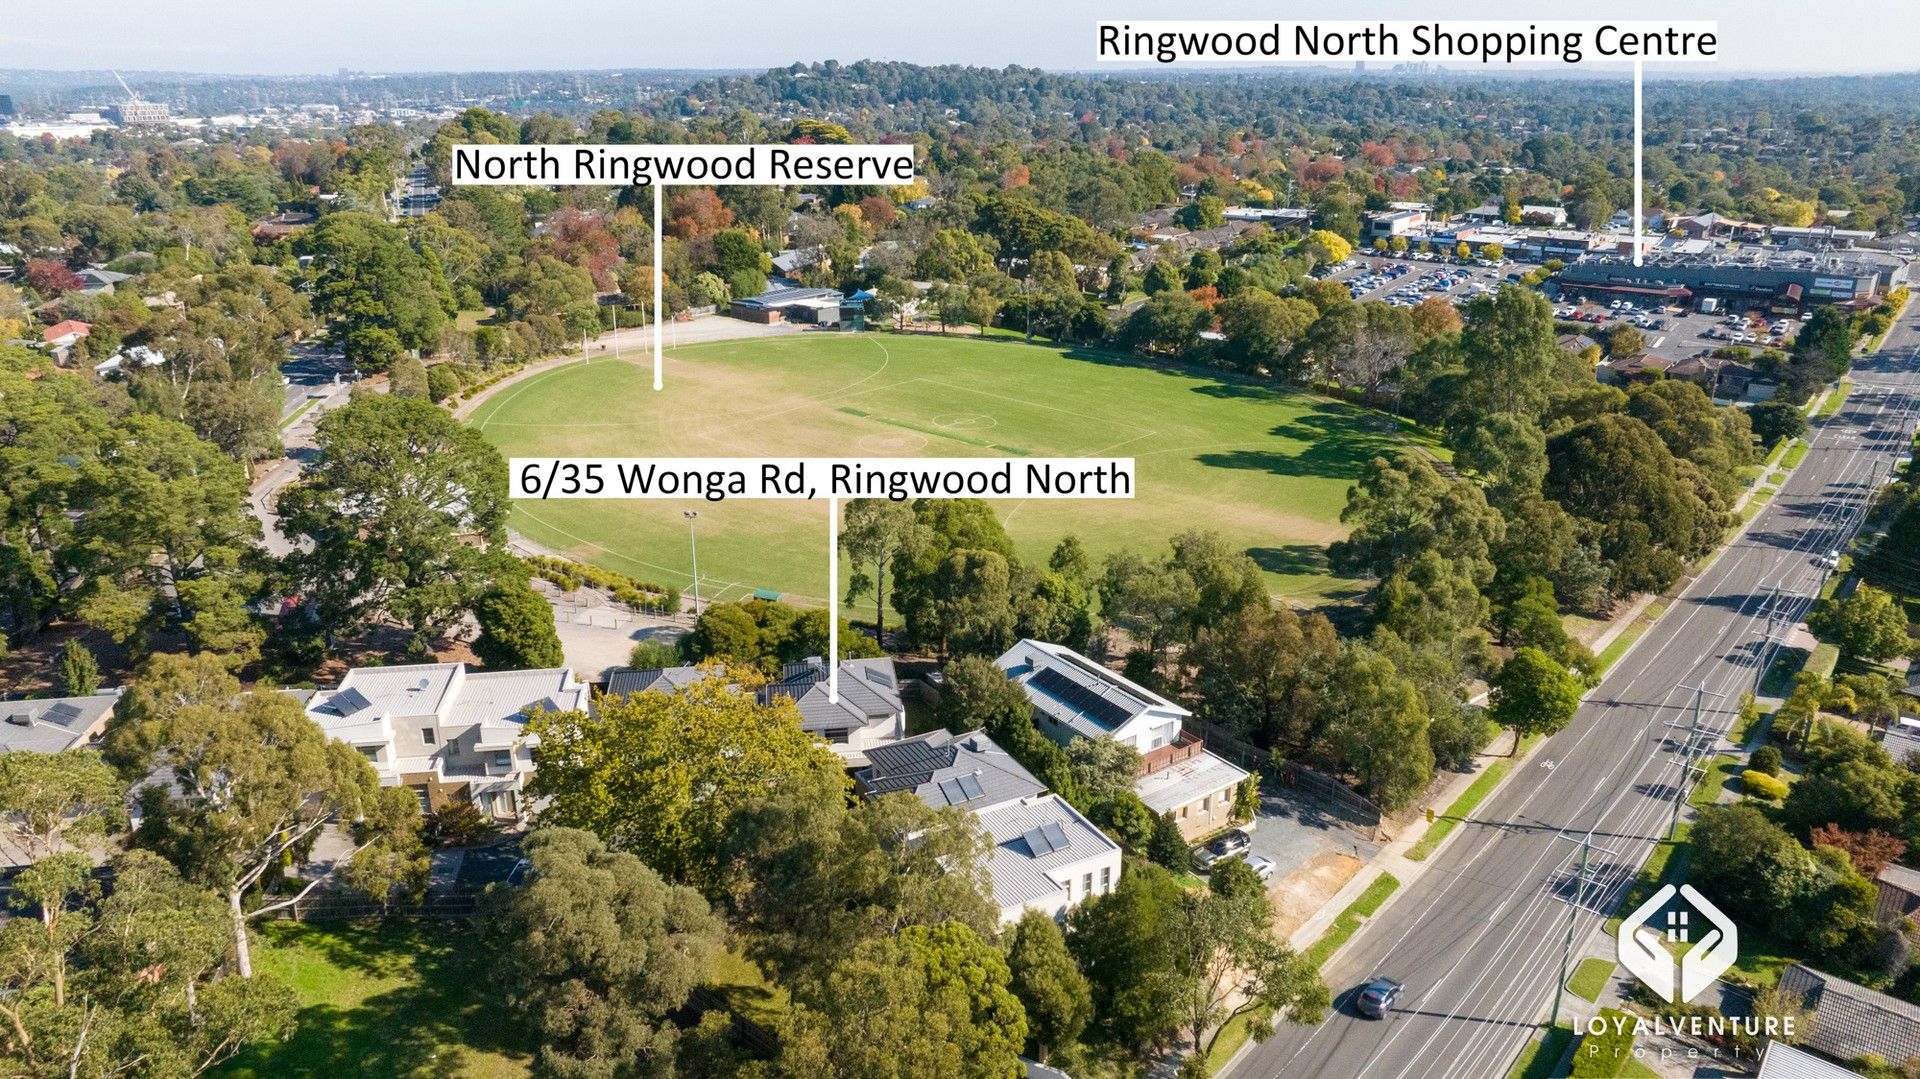 3 bedrooms House in 6/35 Wonga Rd RINGWOOD NORTH VIC, 3134